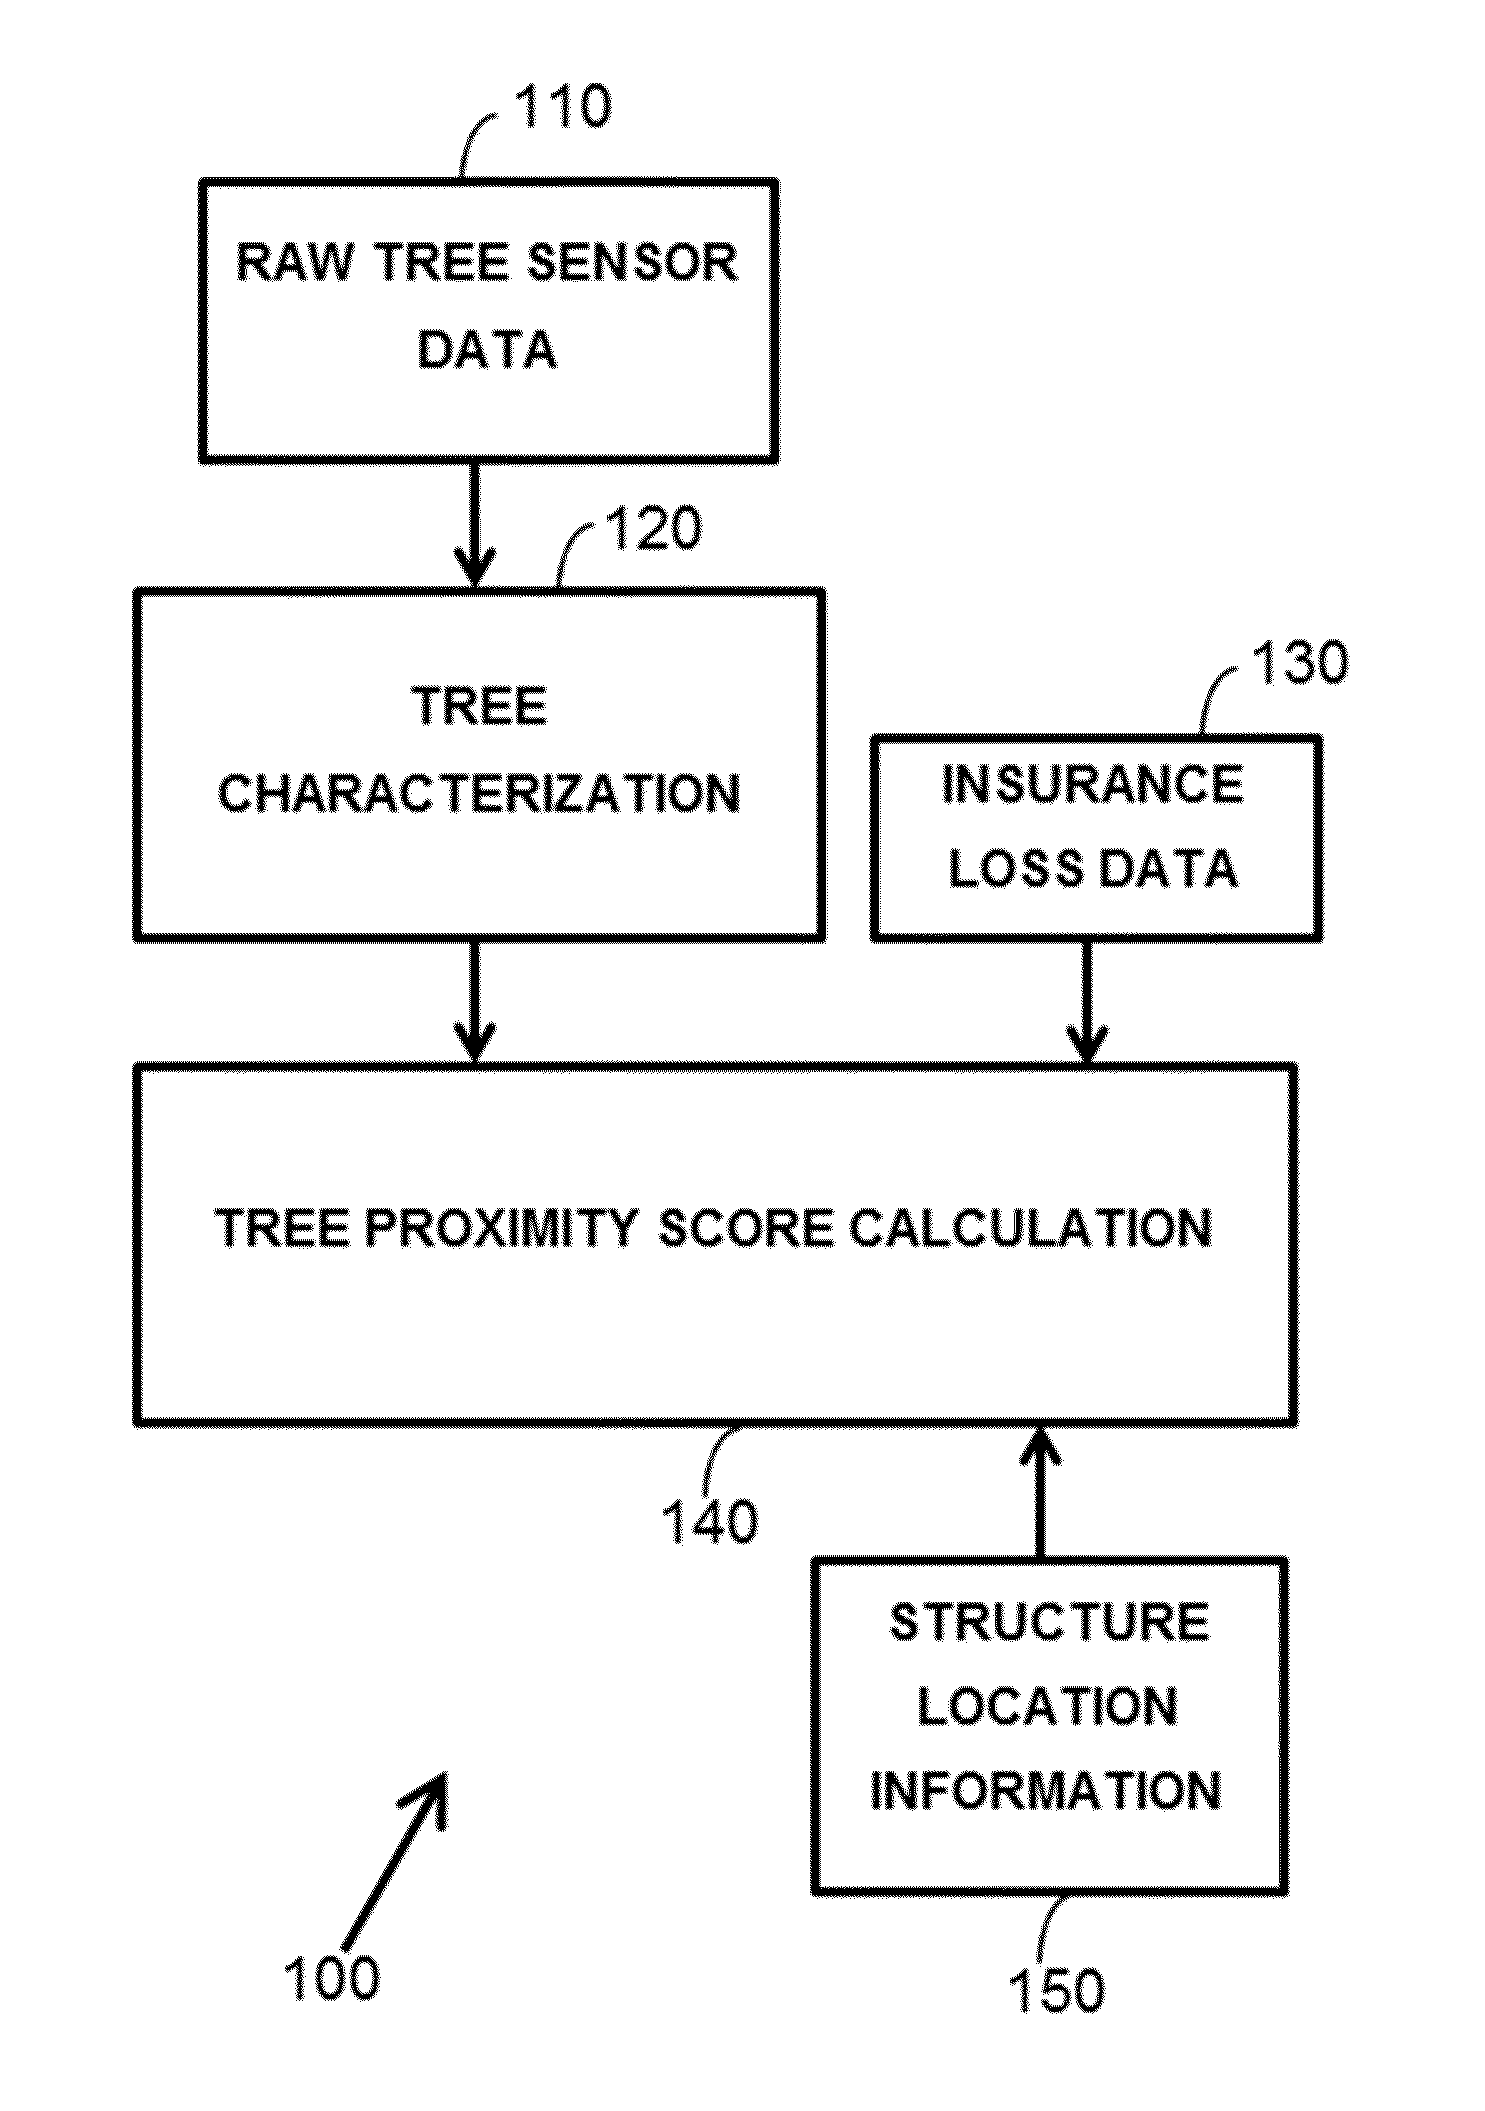 Computer-implemented method for estimating insurance risk of a structure based on tree proximity